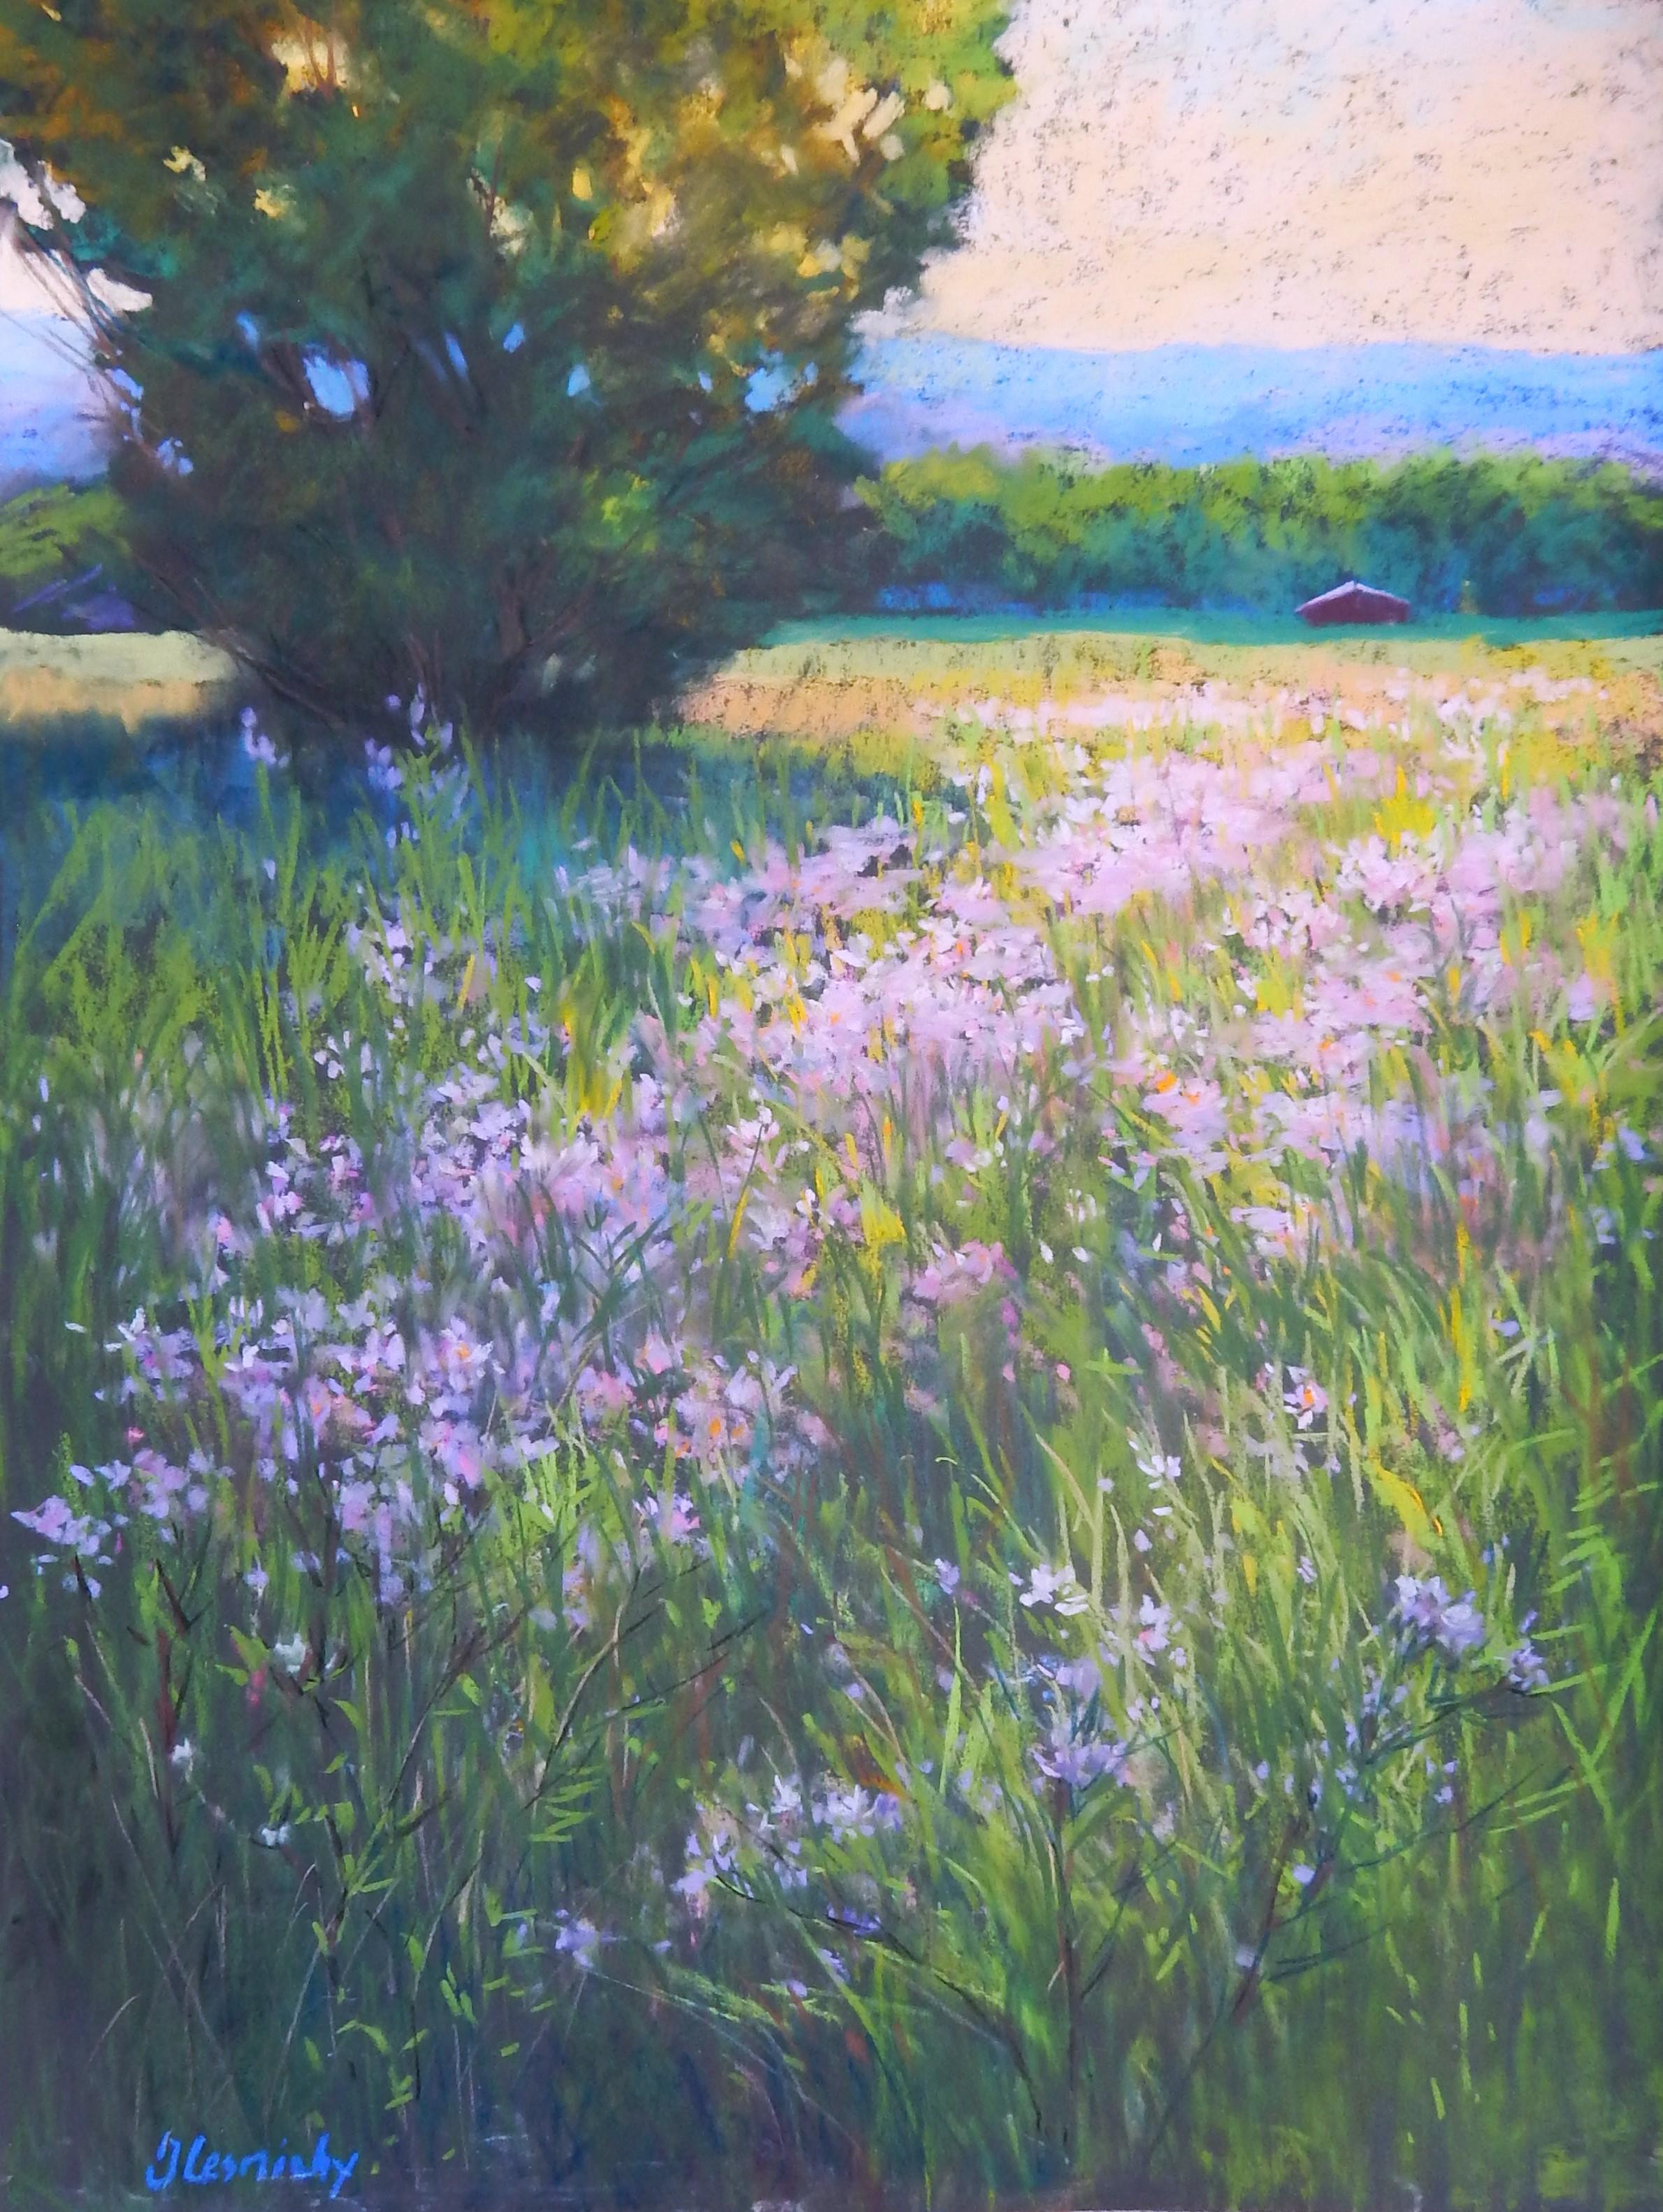 Julia Lesnichy Landscape Painting - Setting Sun in the Meadow, Original Impressionist Painting